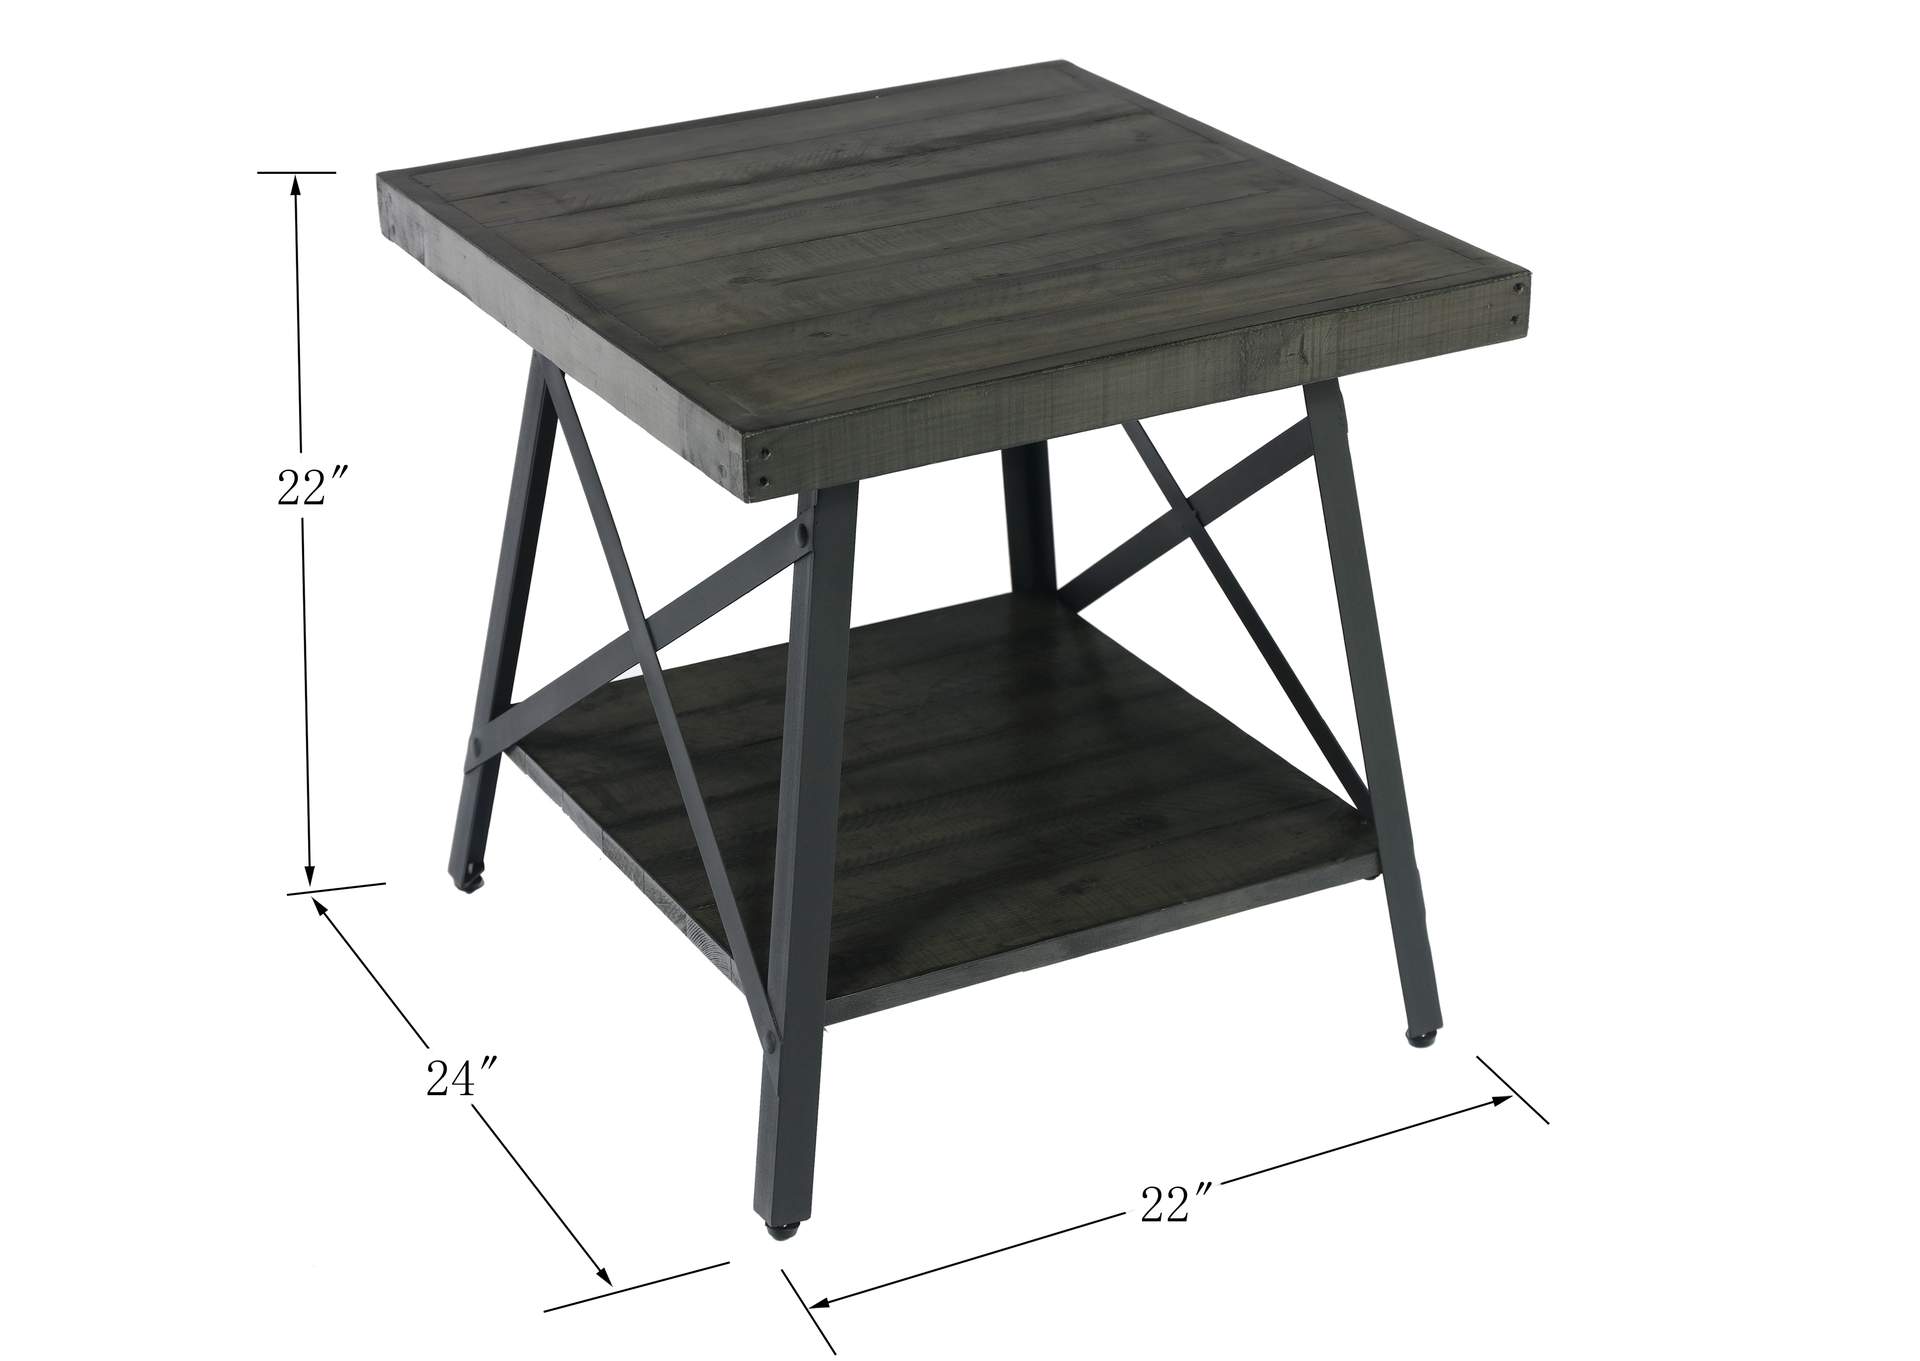 Chandler End Table,Emerald Home Furnishings